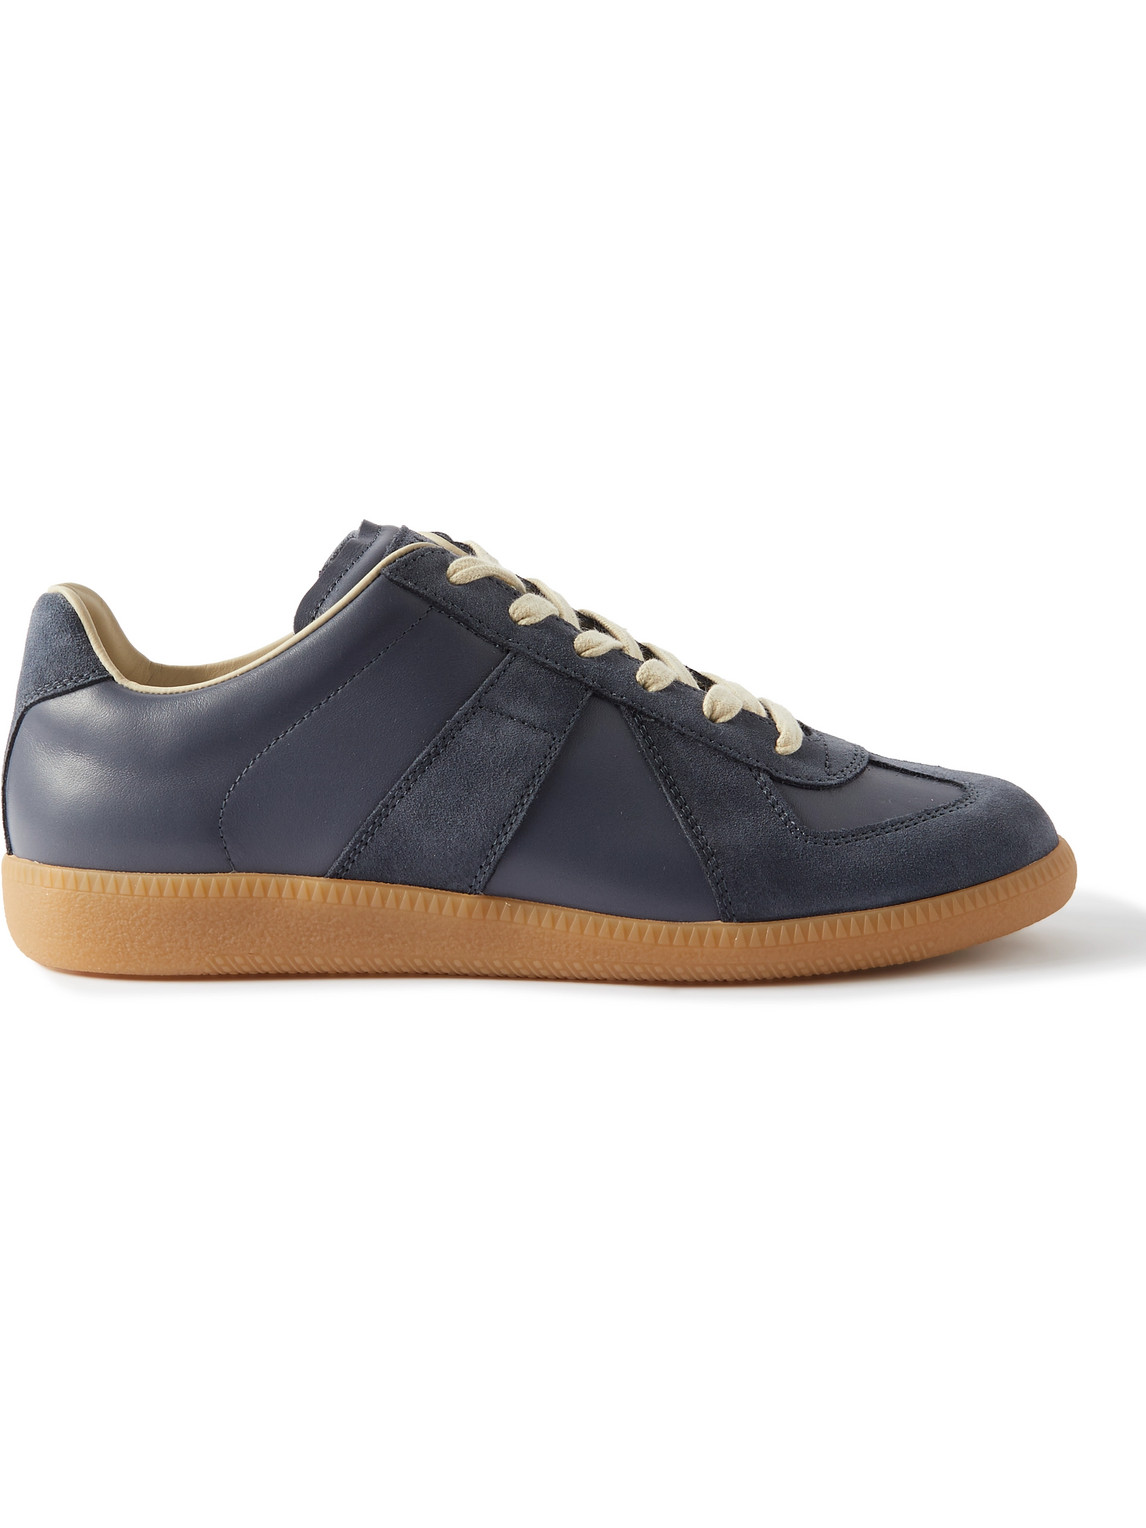 Maison Margiela Replica Leather And Suede Sneakers In Blue